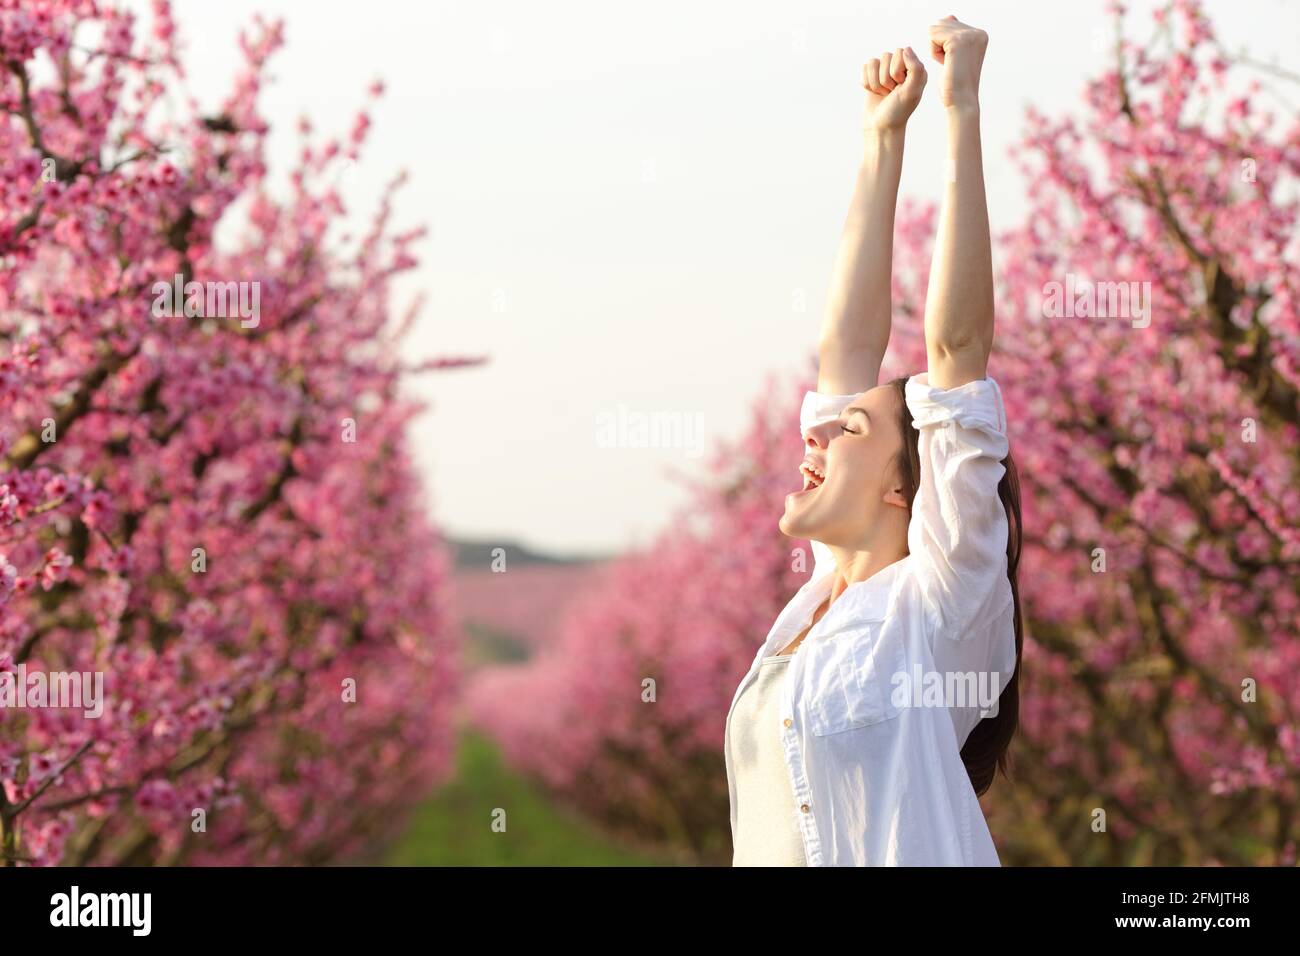 Excited woman raising arms celebrating spring in a pink flowered field Stock Photo